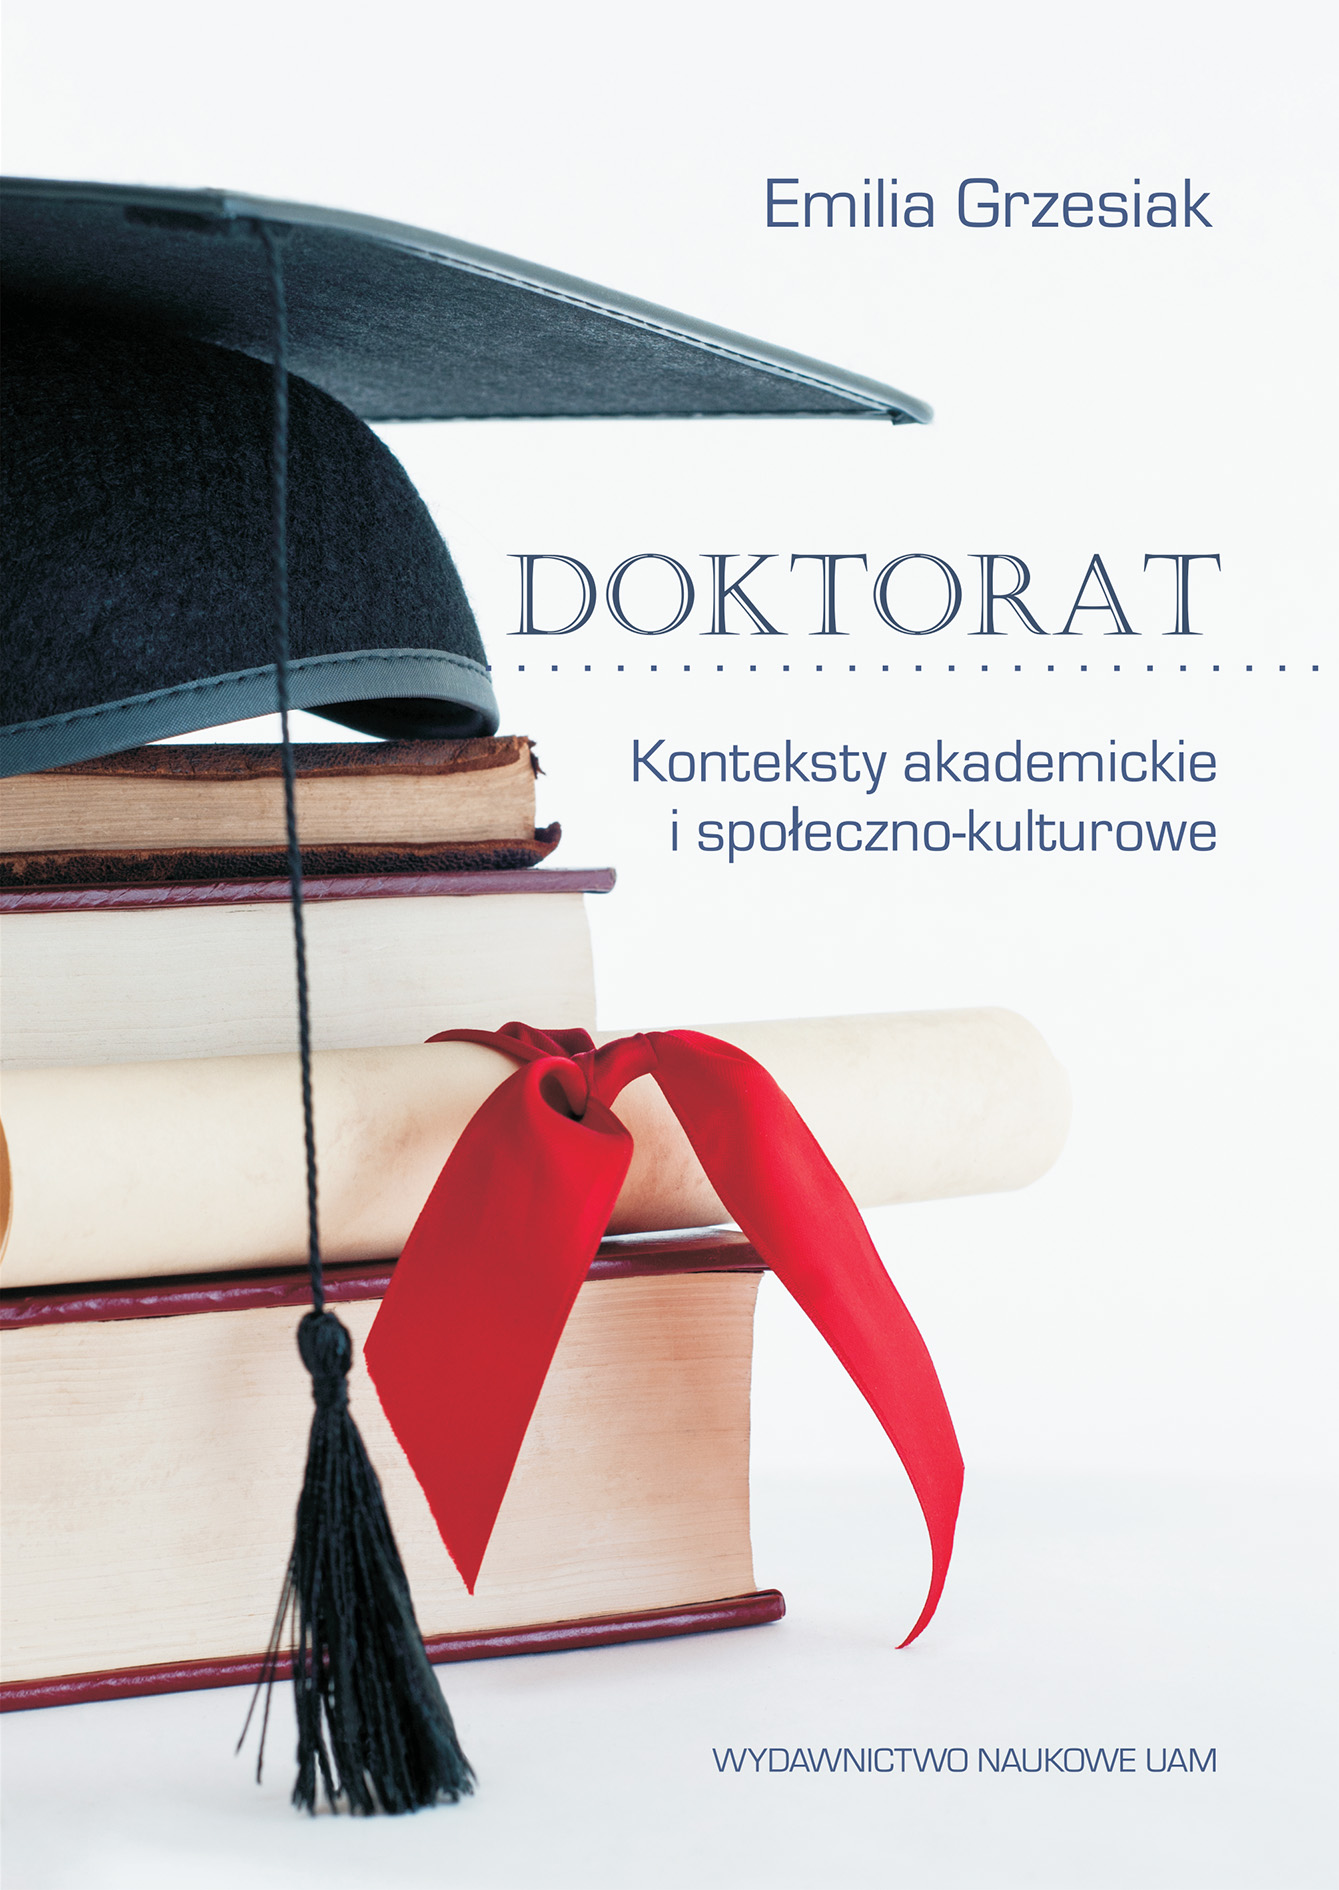 The Doctorate Cover Image